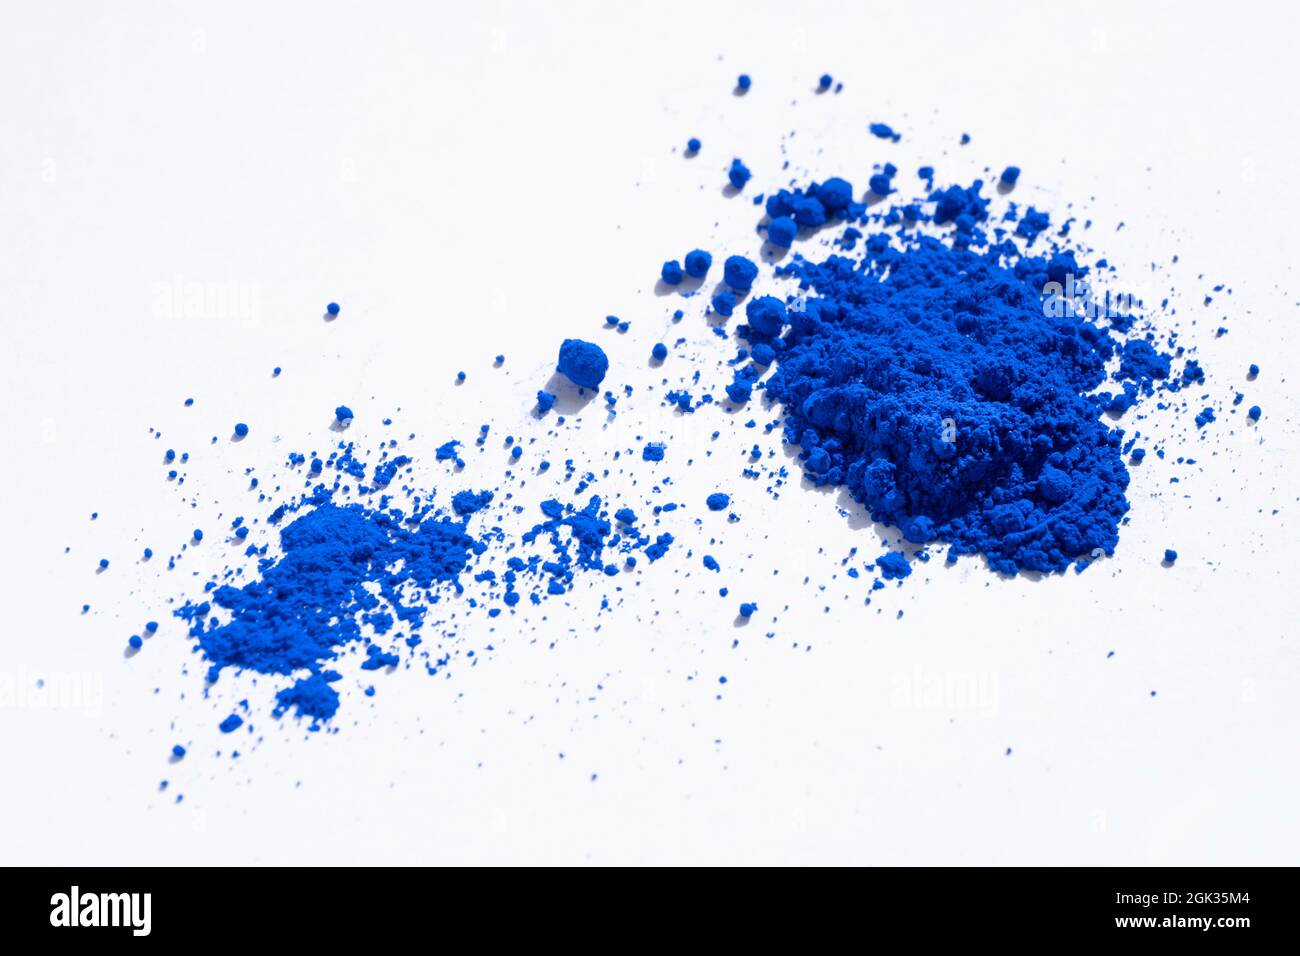 Large and small portion of ultramarine, cobalt or indigo blue pigment on white. The pigment was mixed with linseed oil to make oli paint Stock Photo